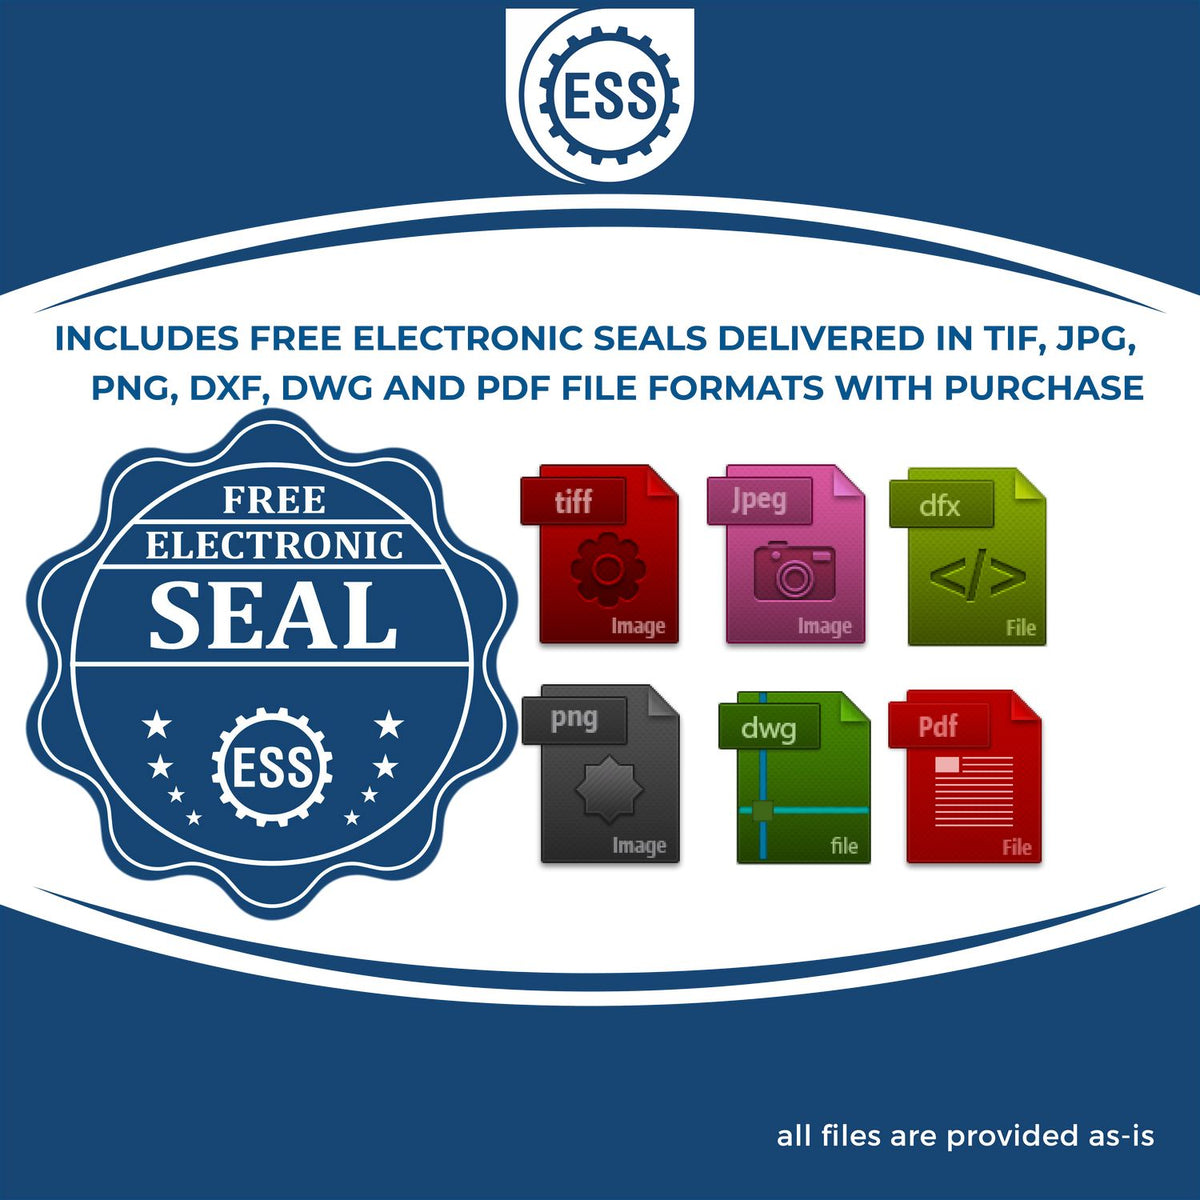 An infographic for the free electronic seal for the Heavy Duty Cast Iron North Dakota Geologist Seal Embosser illustrating the different file type icons such as DXF, DWG, TIF, JPG and PNG.